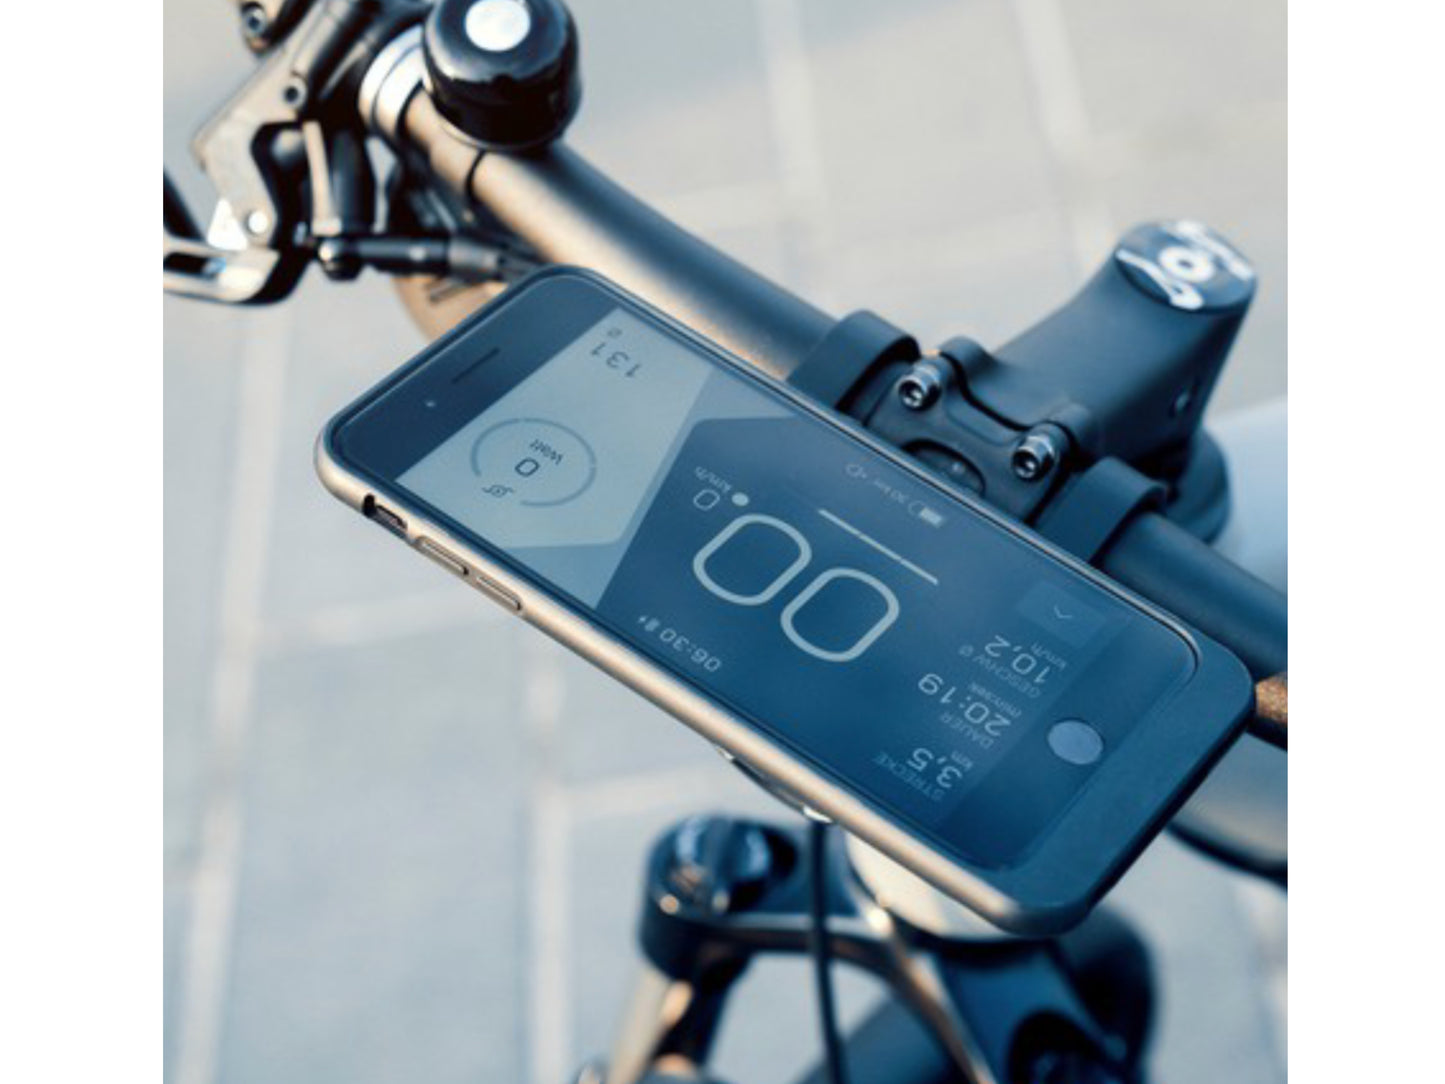 Riese and Muller Roadster Touring eMTB hardtail close up smart phone cockpit